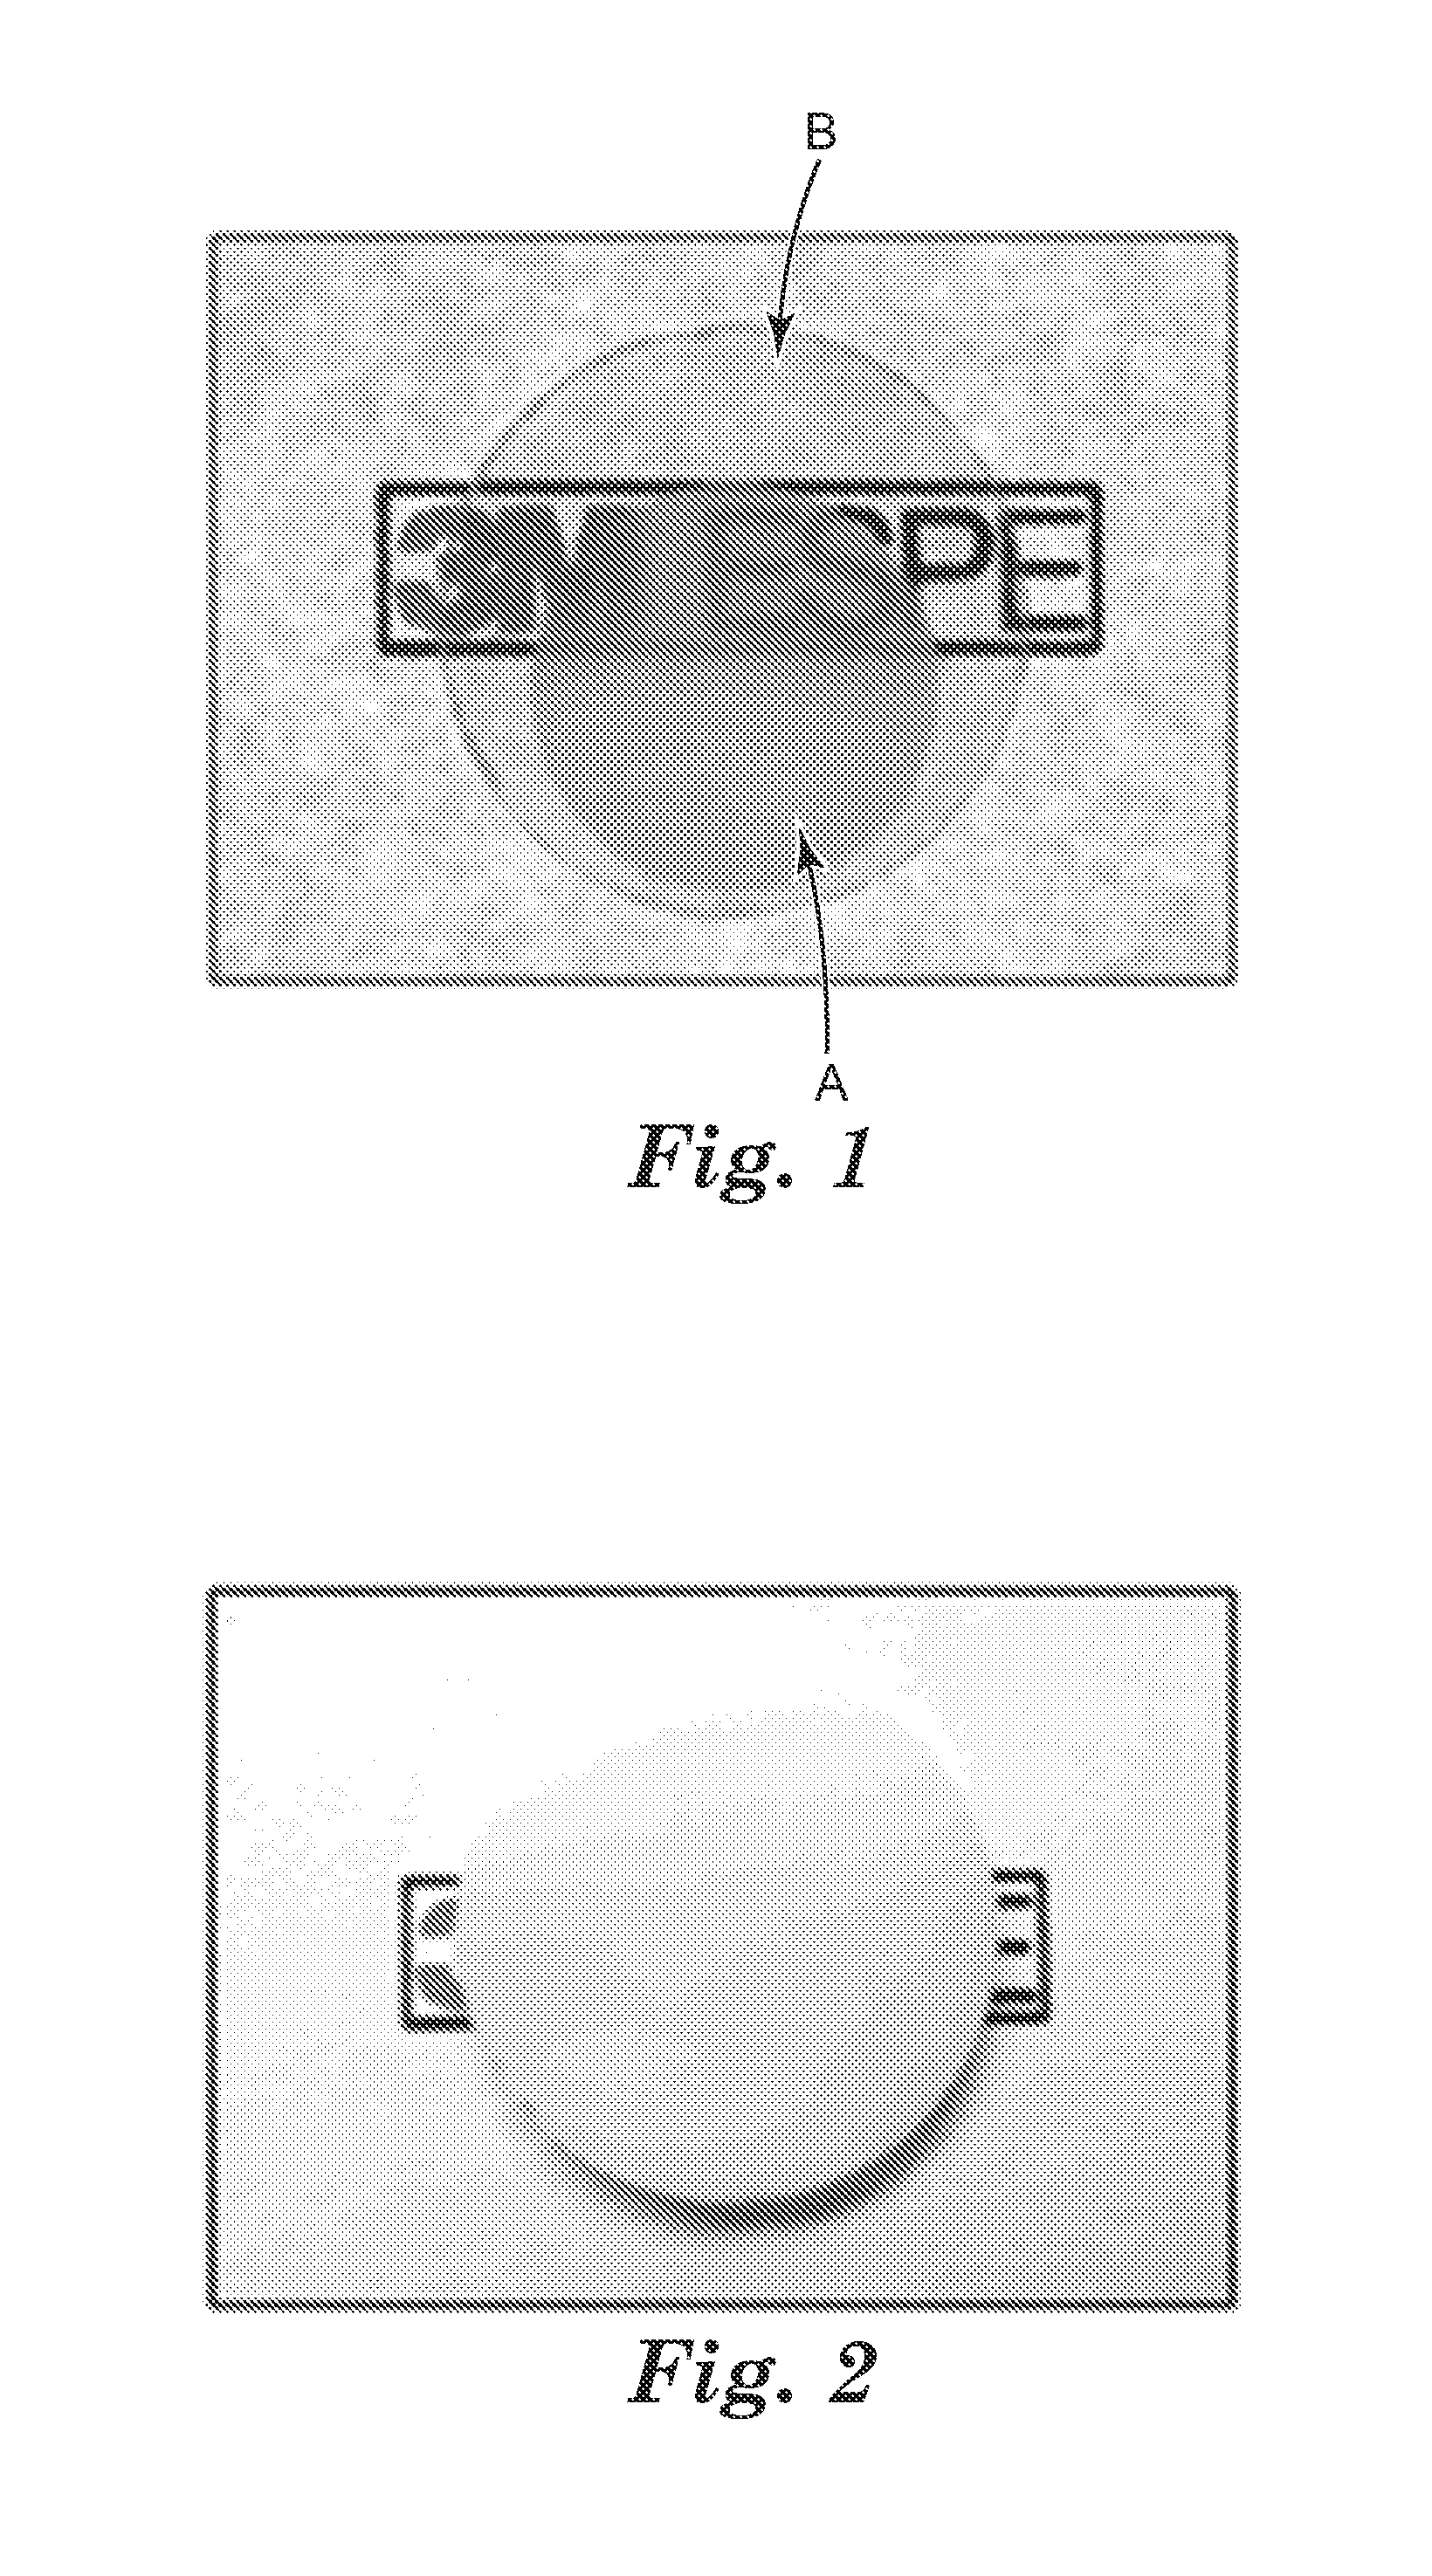 Multi sectional dental zirconia milling block, process of production and use thereof